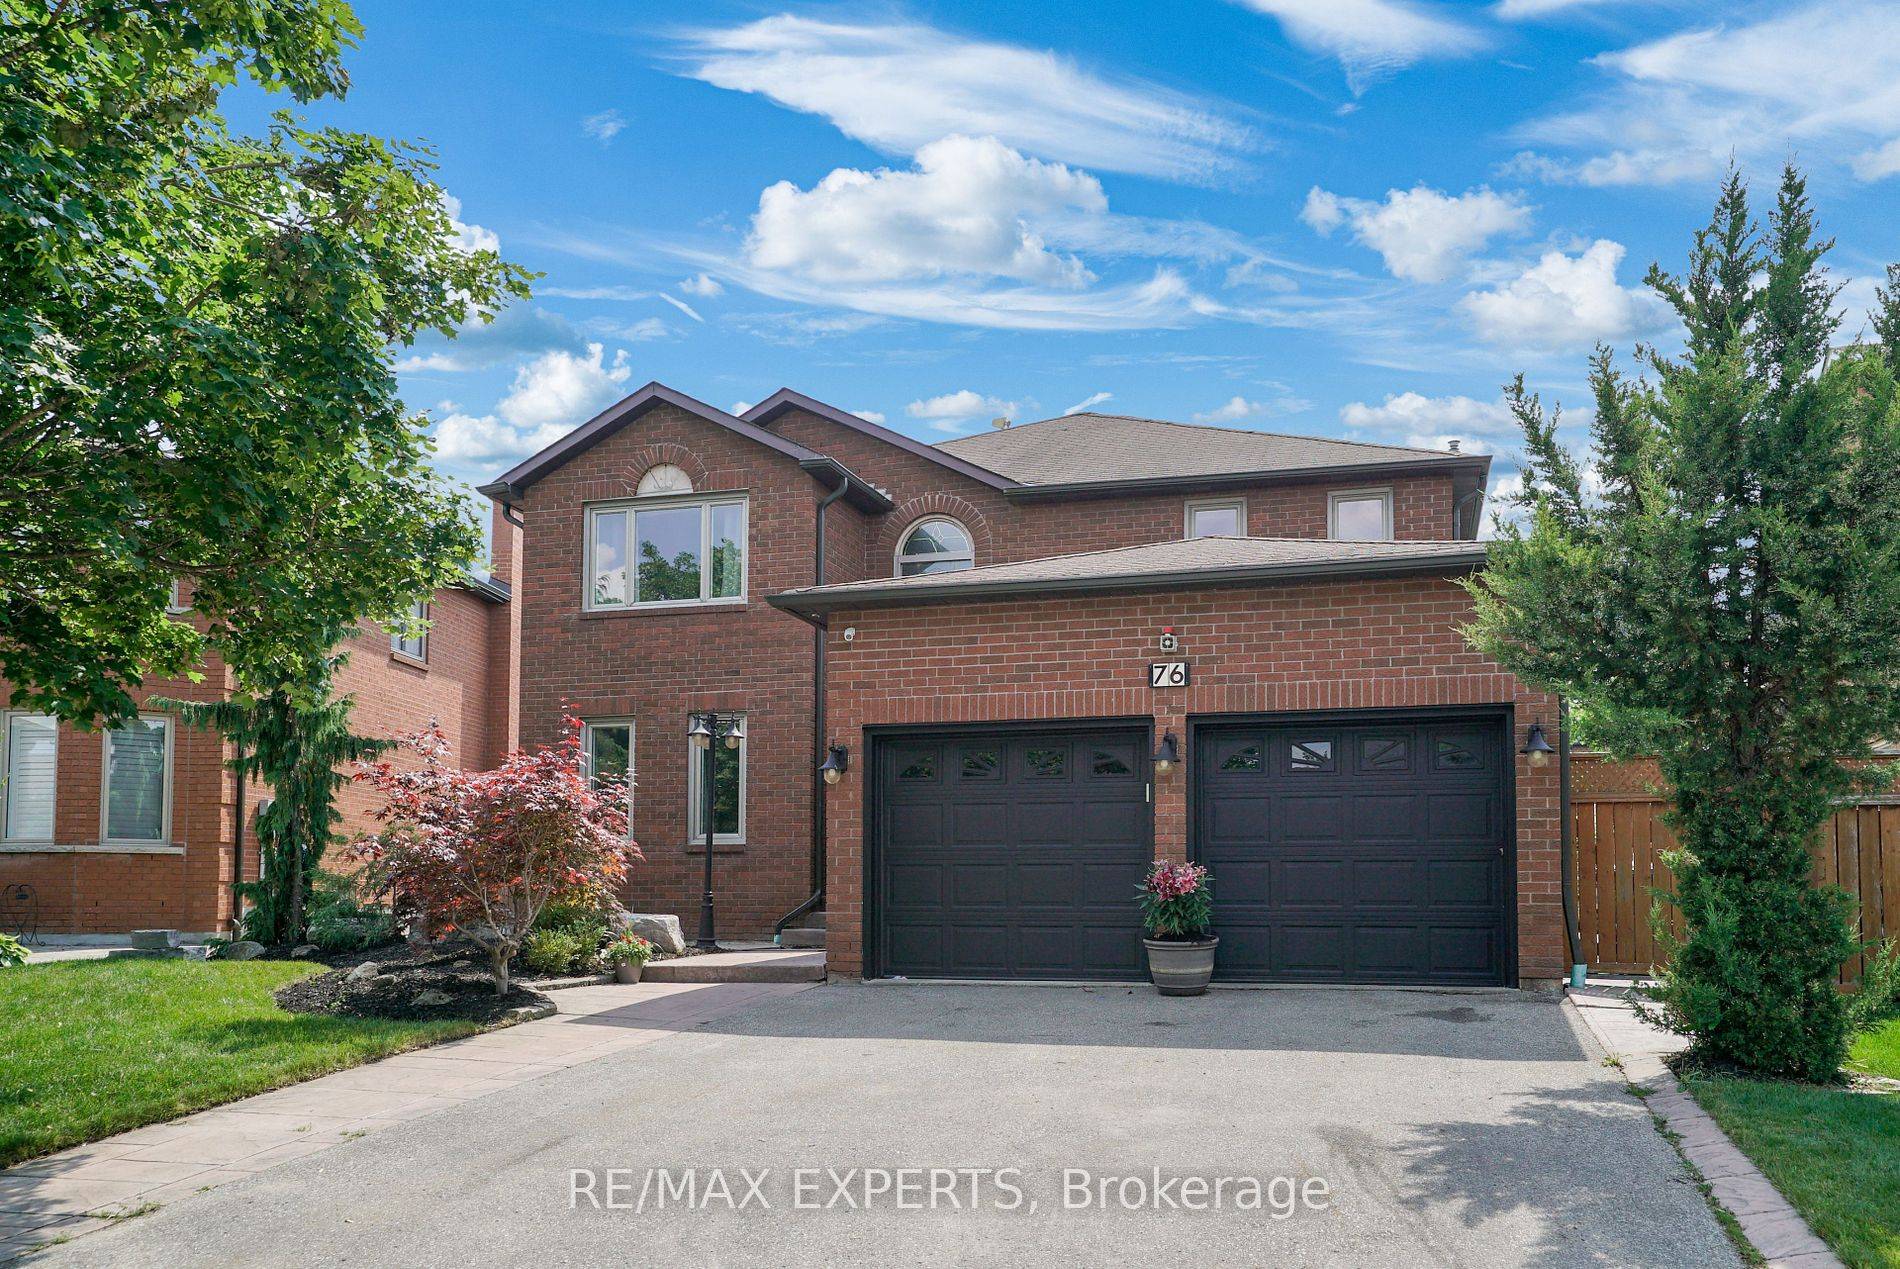 Welcome to 76 Taylorwood ave in th quiet family friendly community of Caledon.